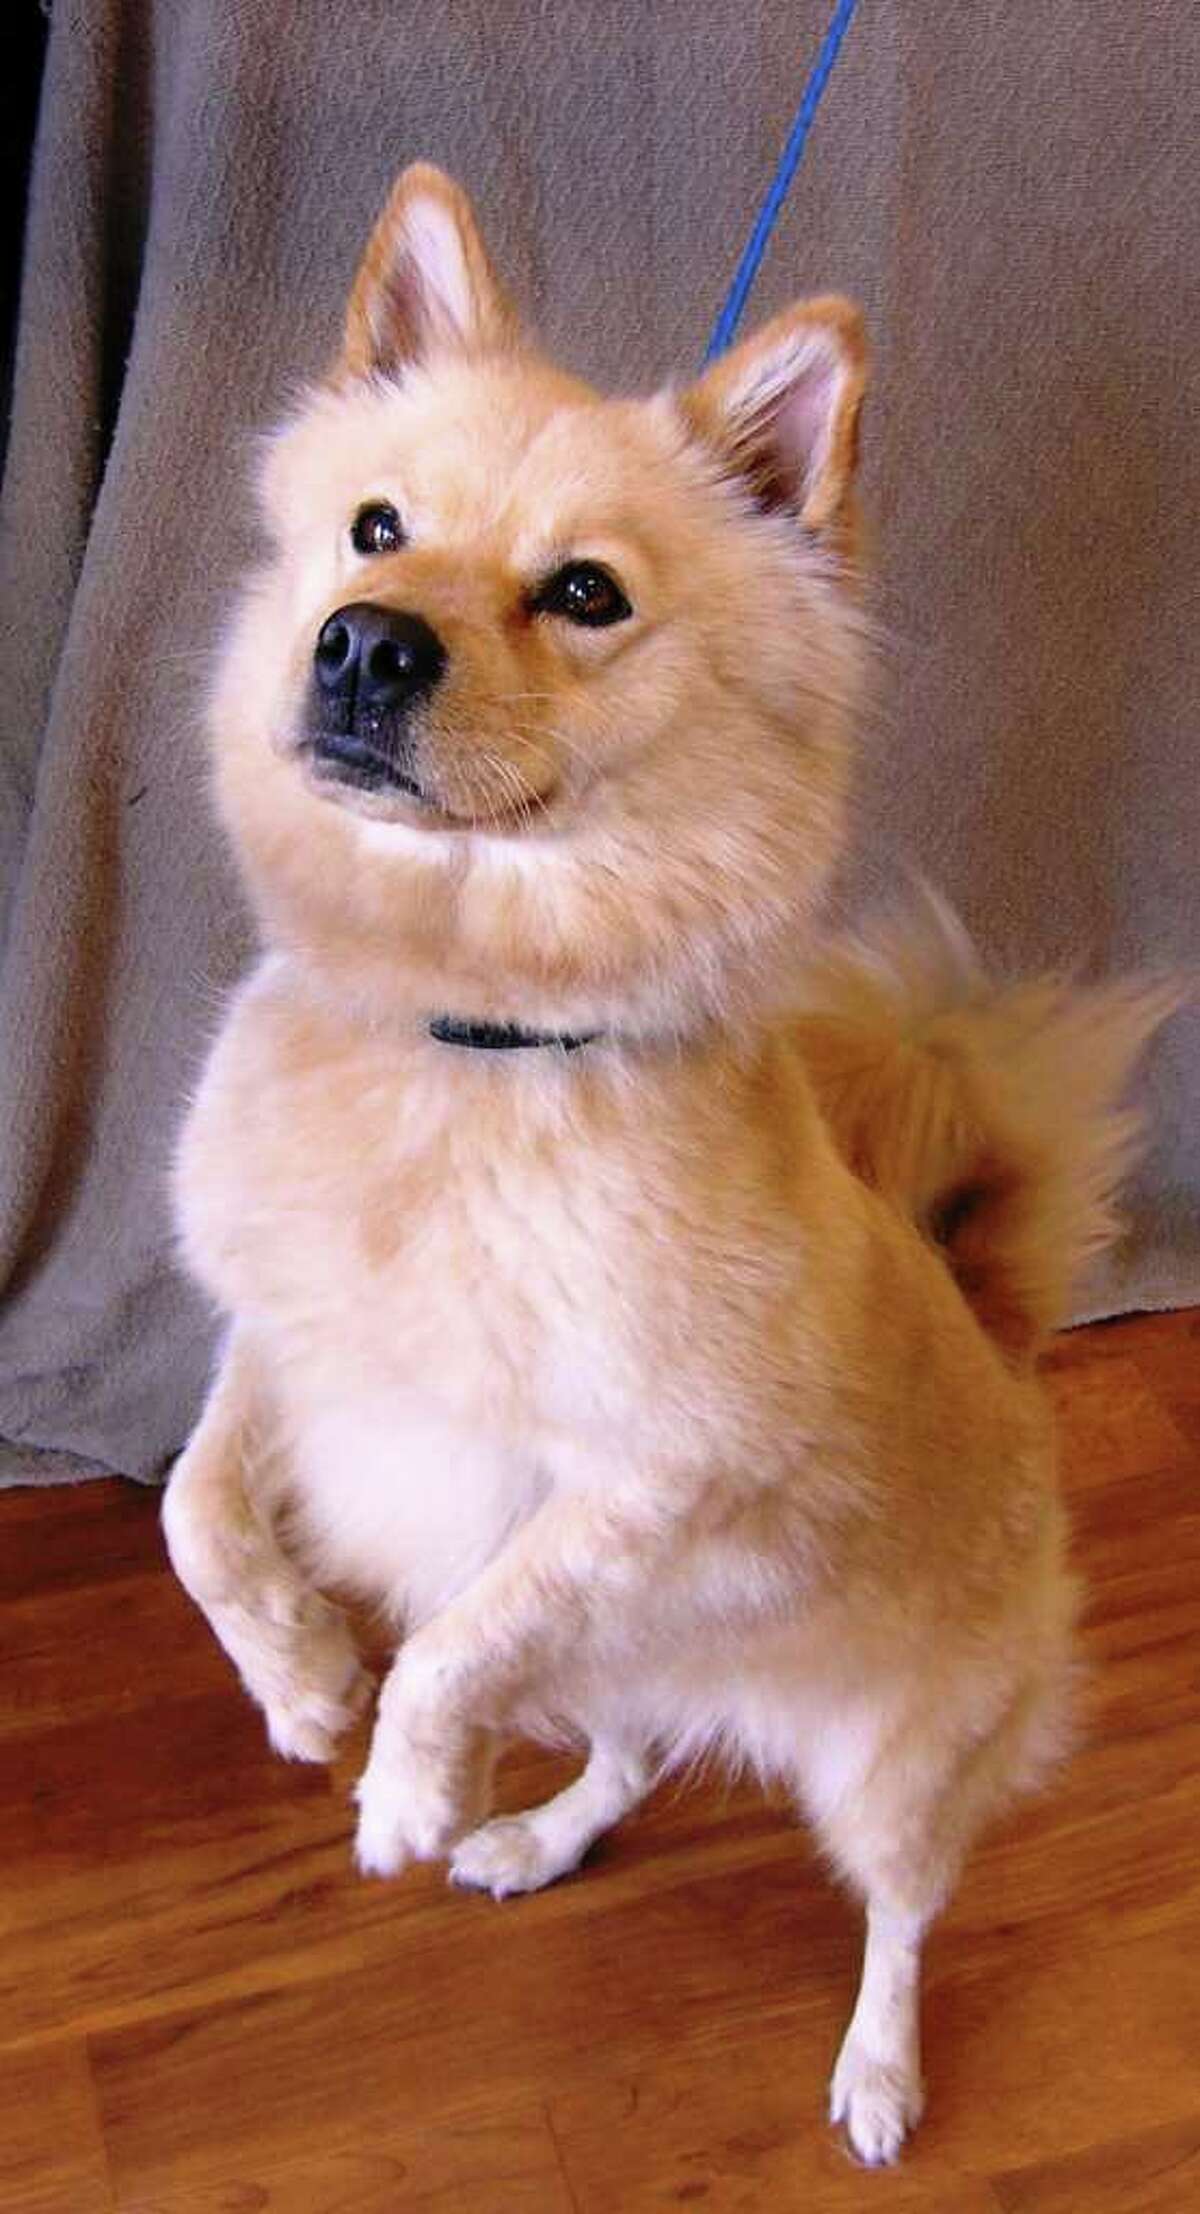 Daisy, an American Eskimo, Spitz, Chow Mix 2 year old dog, is the Pet of the Week for March 4, 2012.